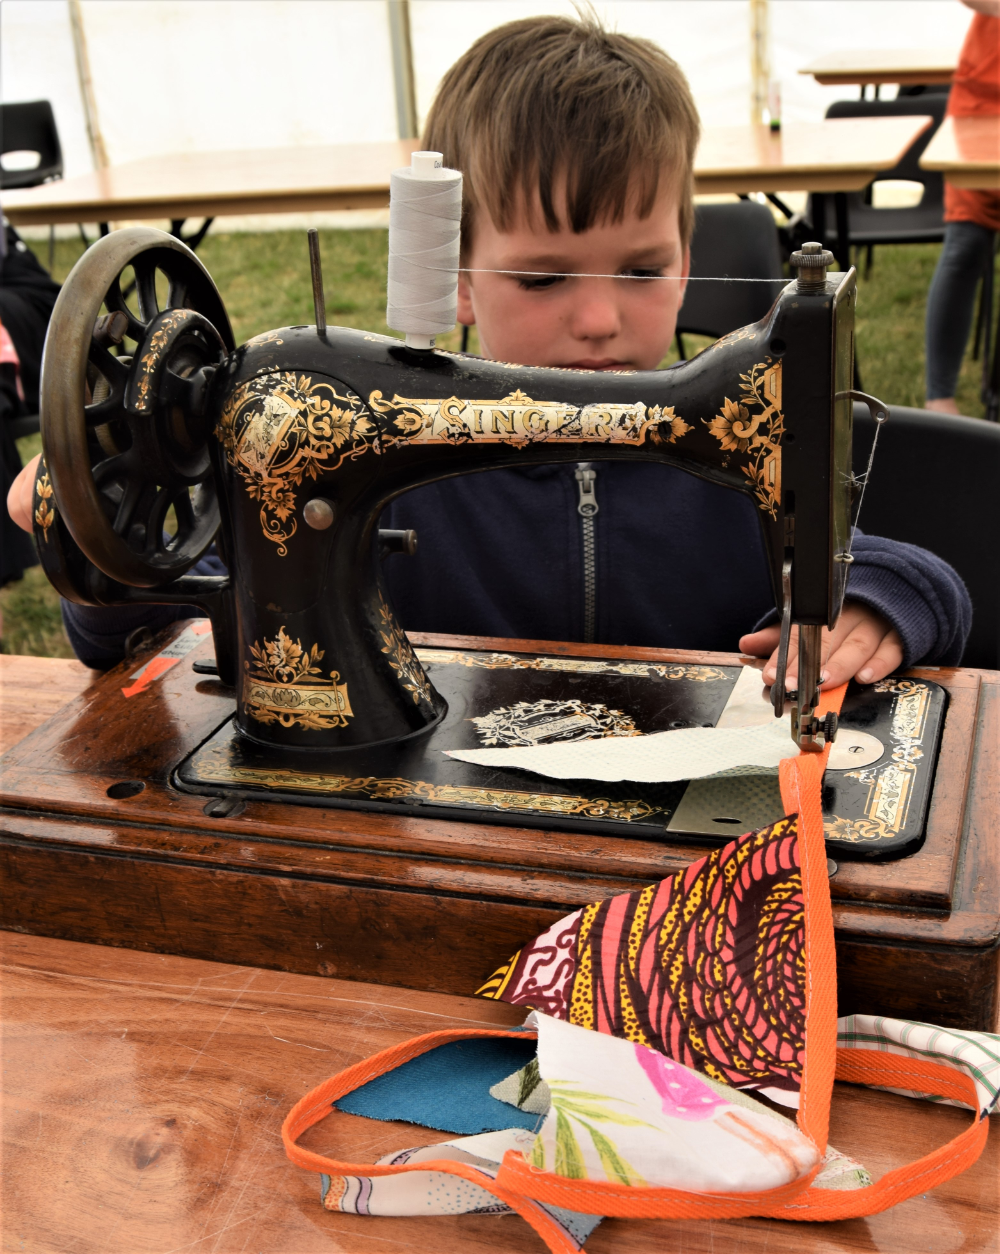 Young person sat in front of a handcrank sewing machine